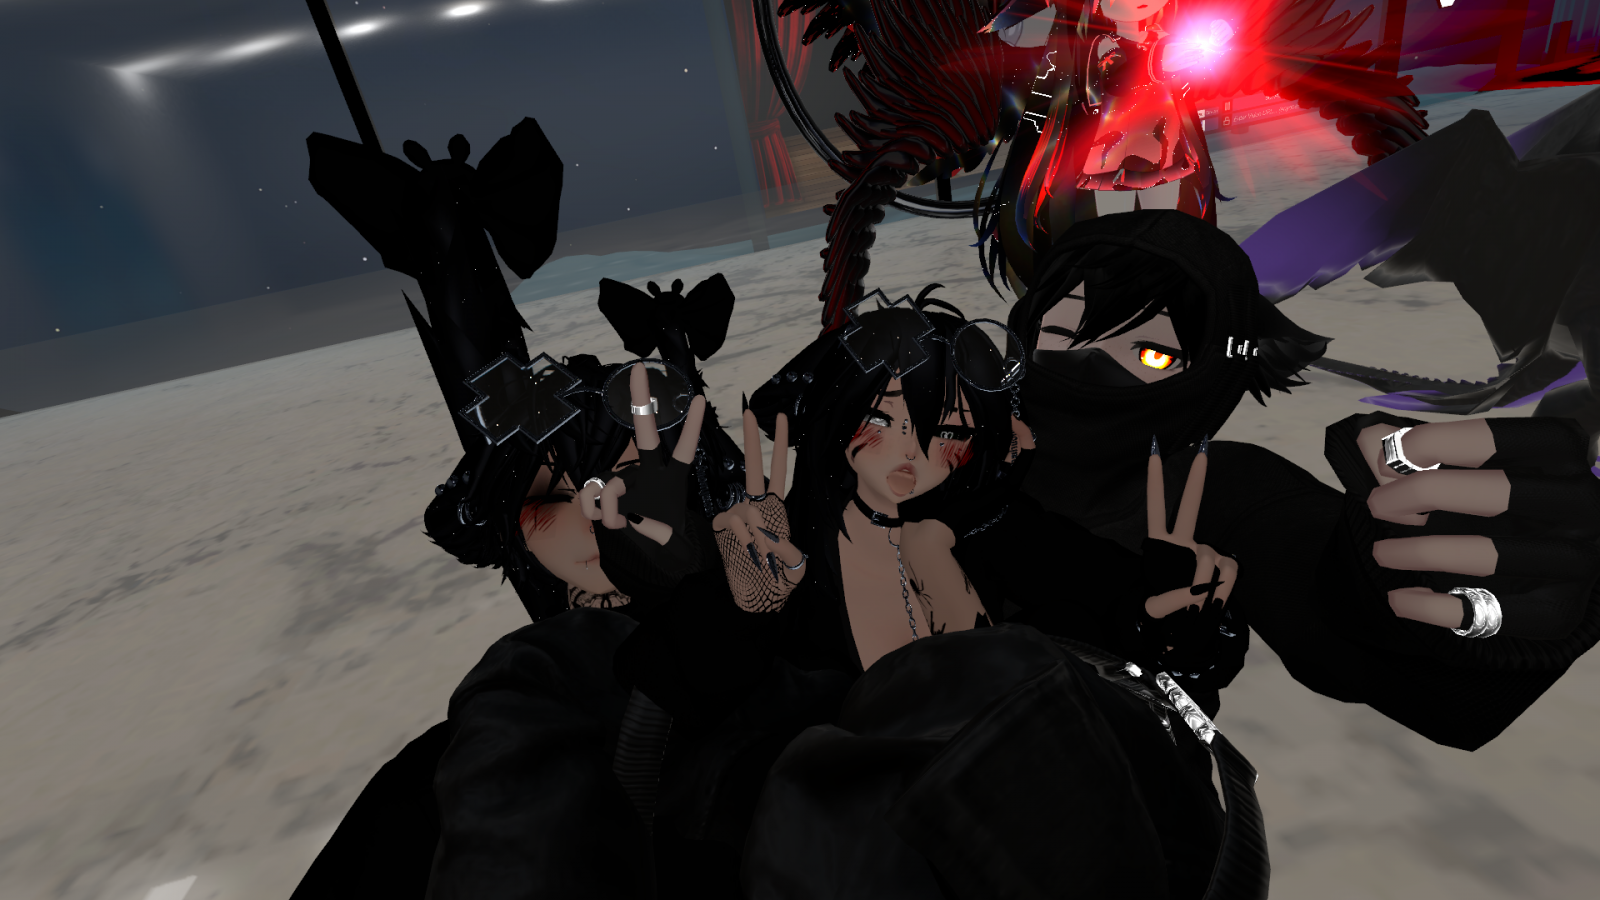 VRChat_1920x1080_2022-04-15_23-06-48.126.png